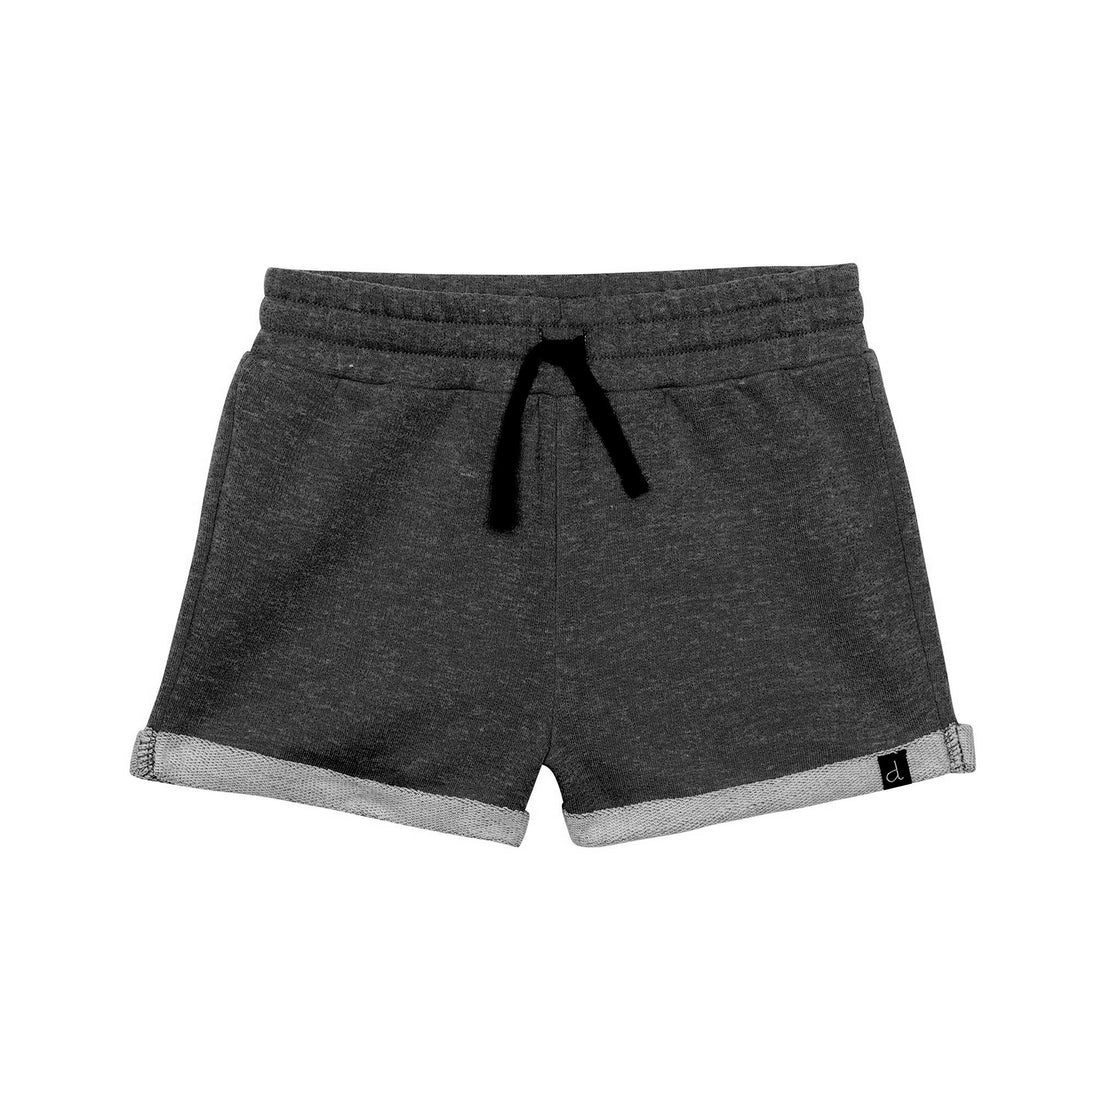 FRENCH TERRY SHORT IN CHARCOAL MIX, GIRL